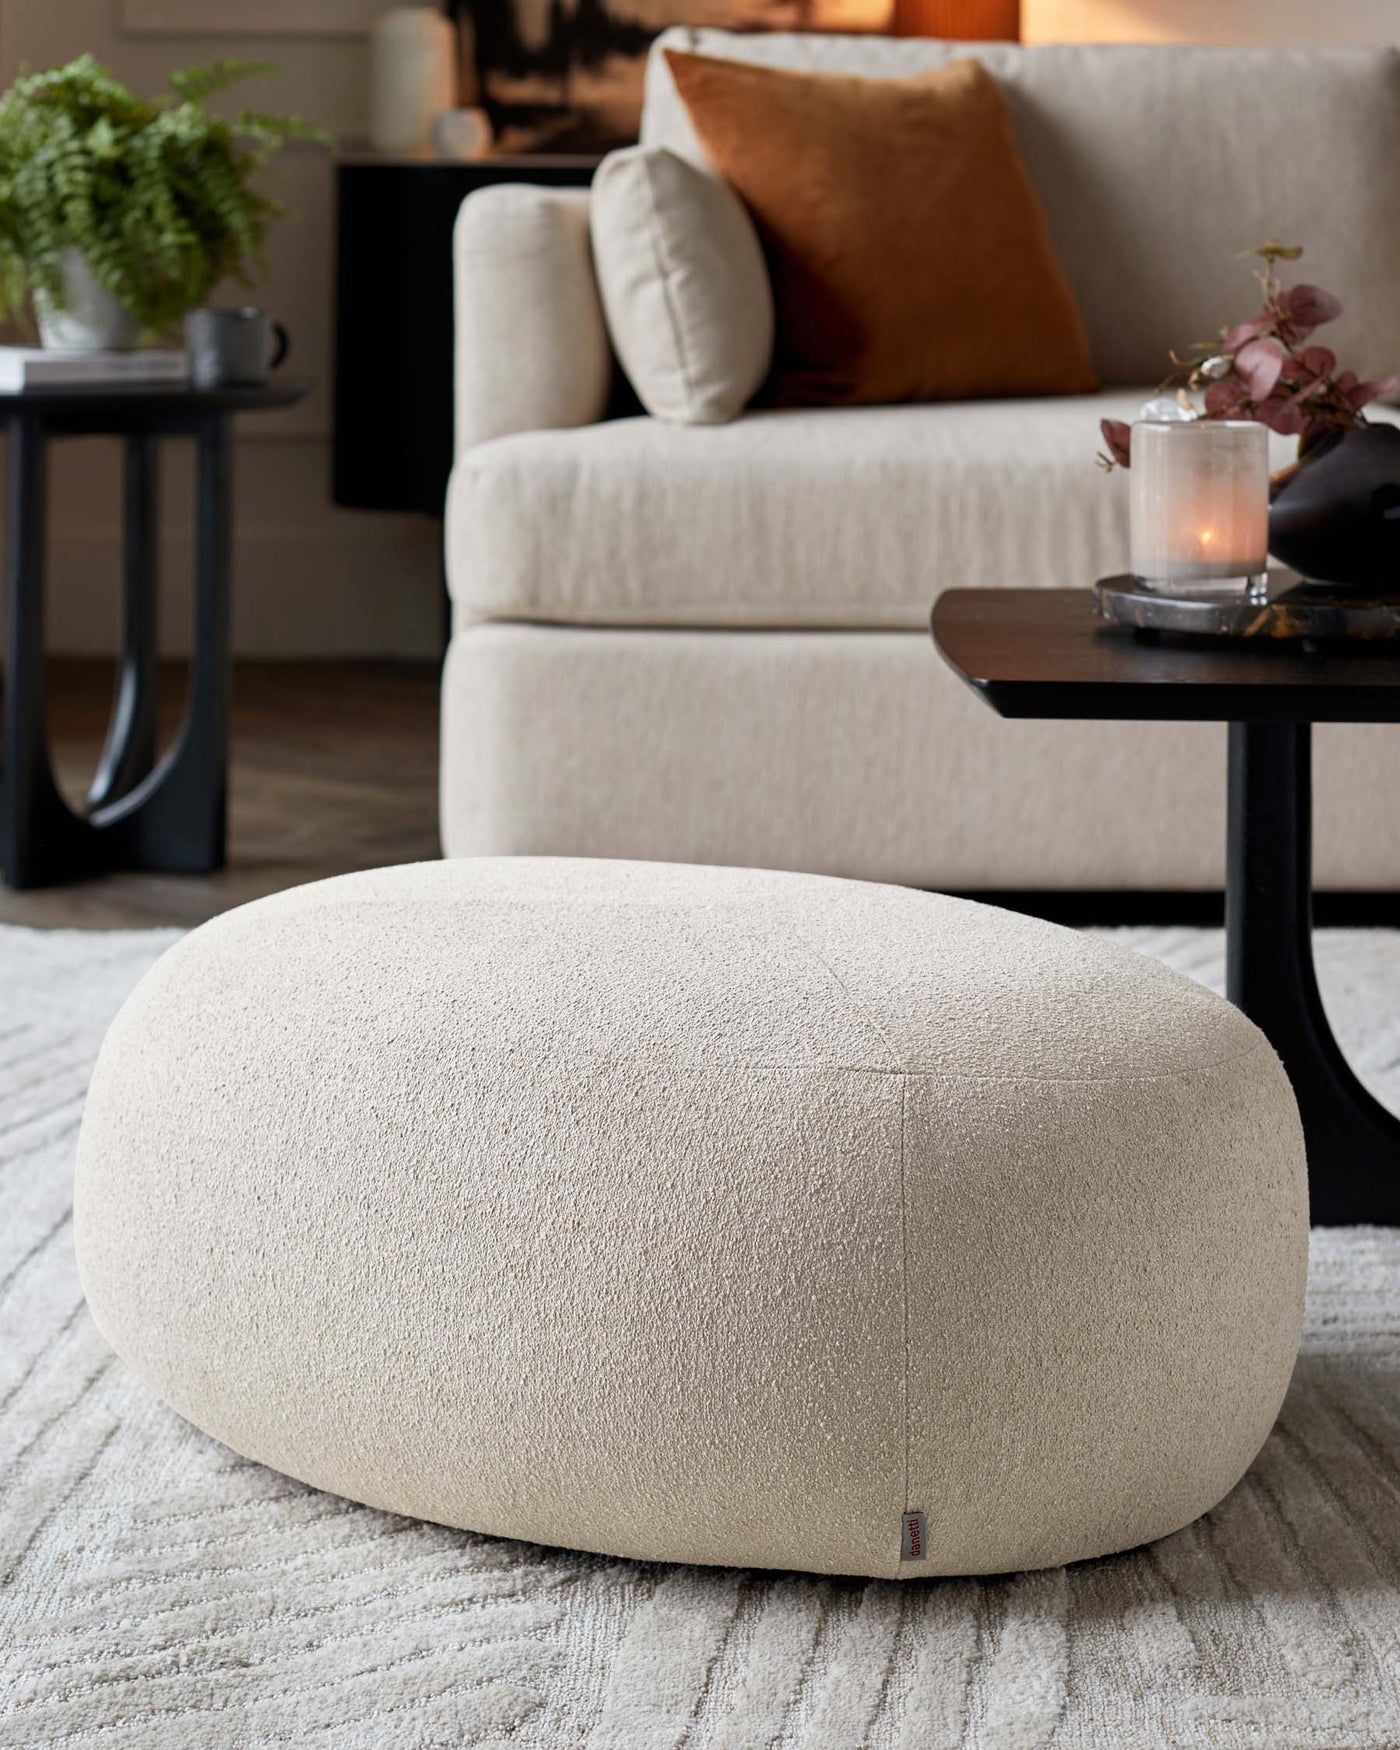 Elegant living room featuring a contemporary beige sofa with plush cushions and a round beige boucle ottoman in the foreground. A small round black side table with a candle is visible next to the sofa, all resting on a textured light area rug.